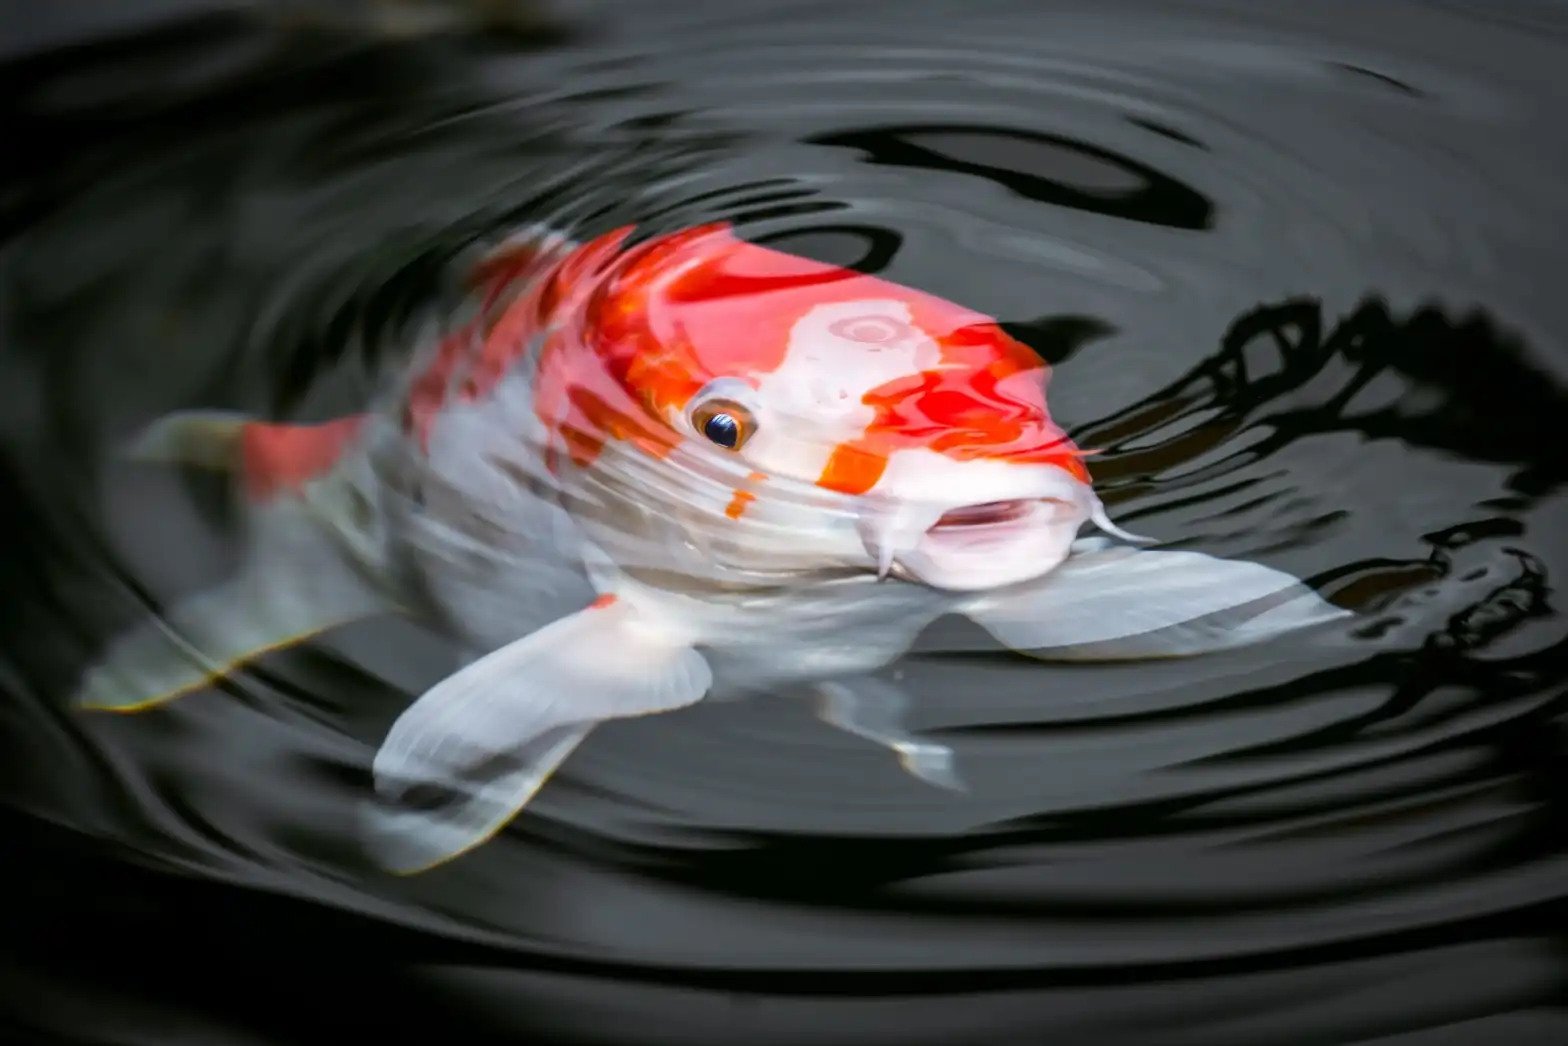 A close up shot of koi fish in pond